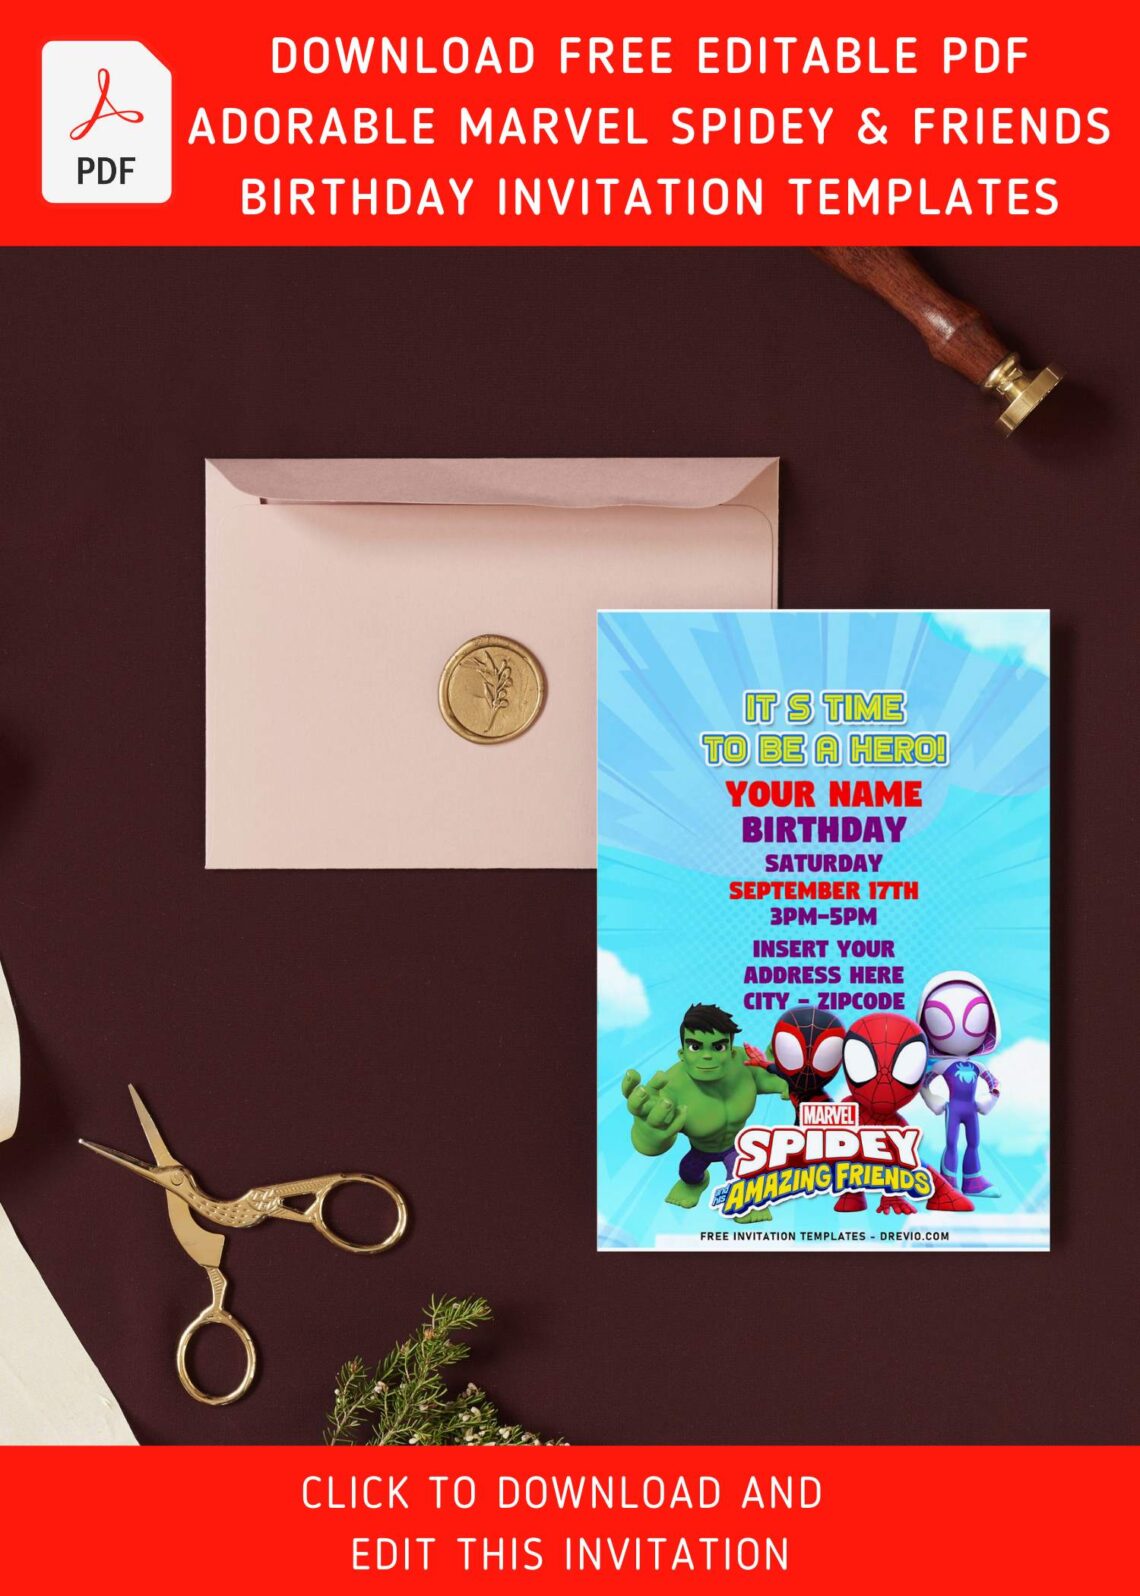 (Free Editable PDF) Mighty Spidey And His Amazing Friends Birthday Invitation Templates